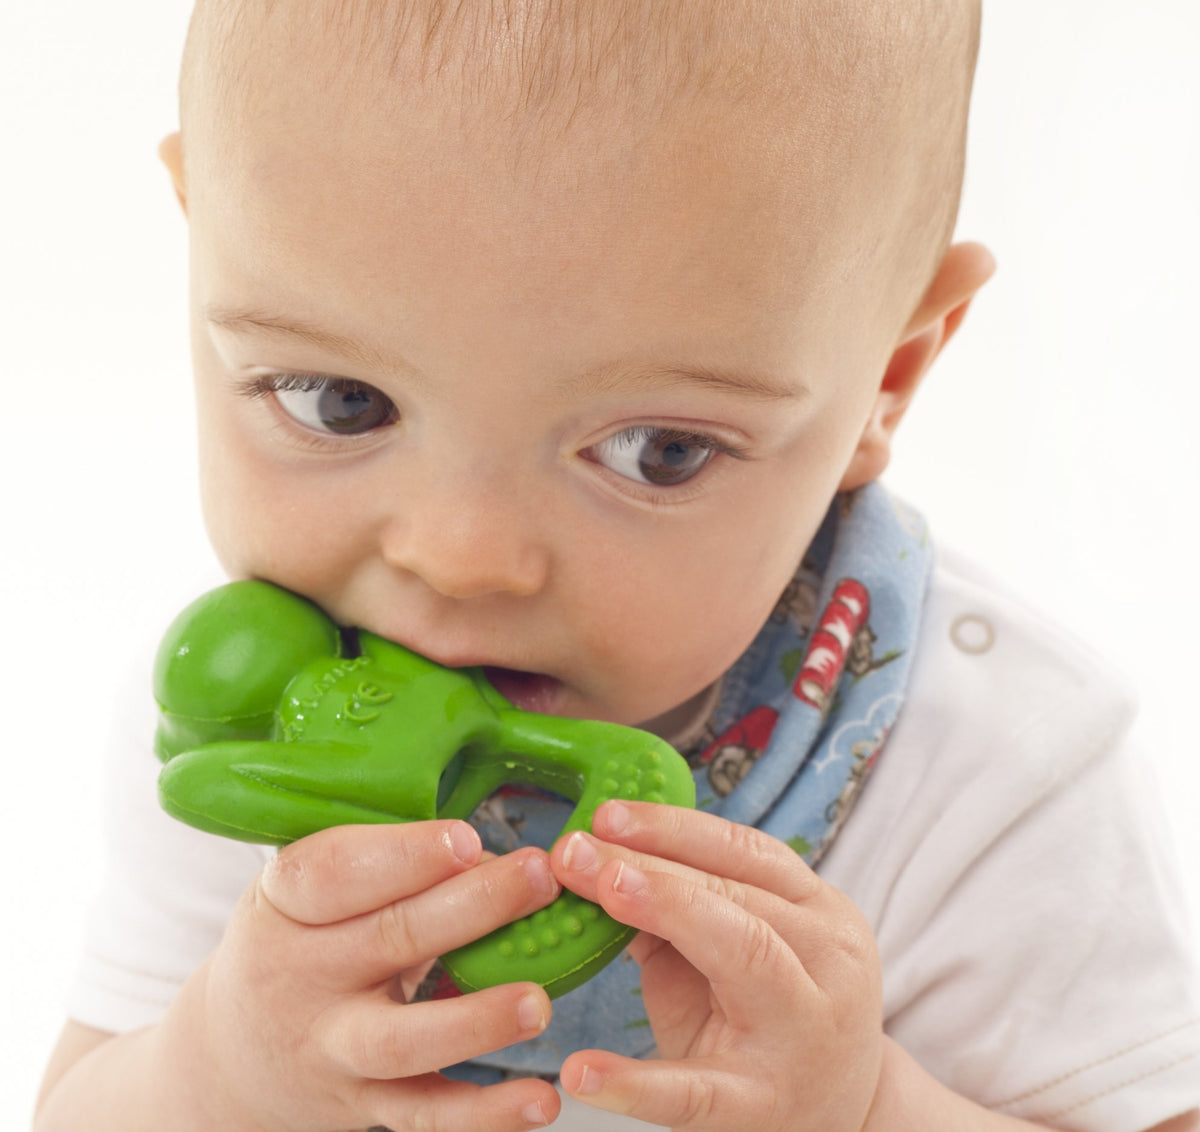 Frog Teething Toy - Buy Bo the Frog Teething Toy | Natural Rubber Toy